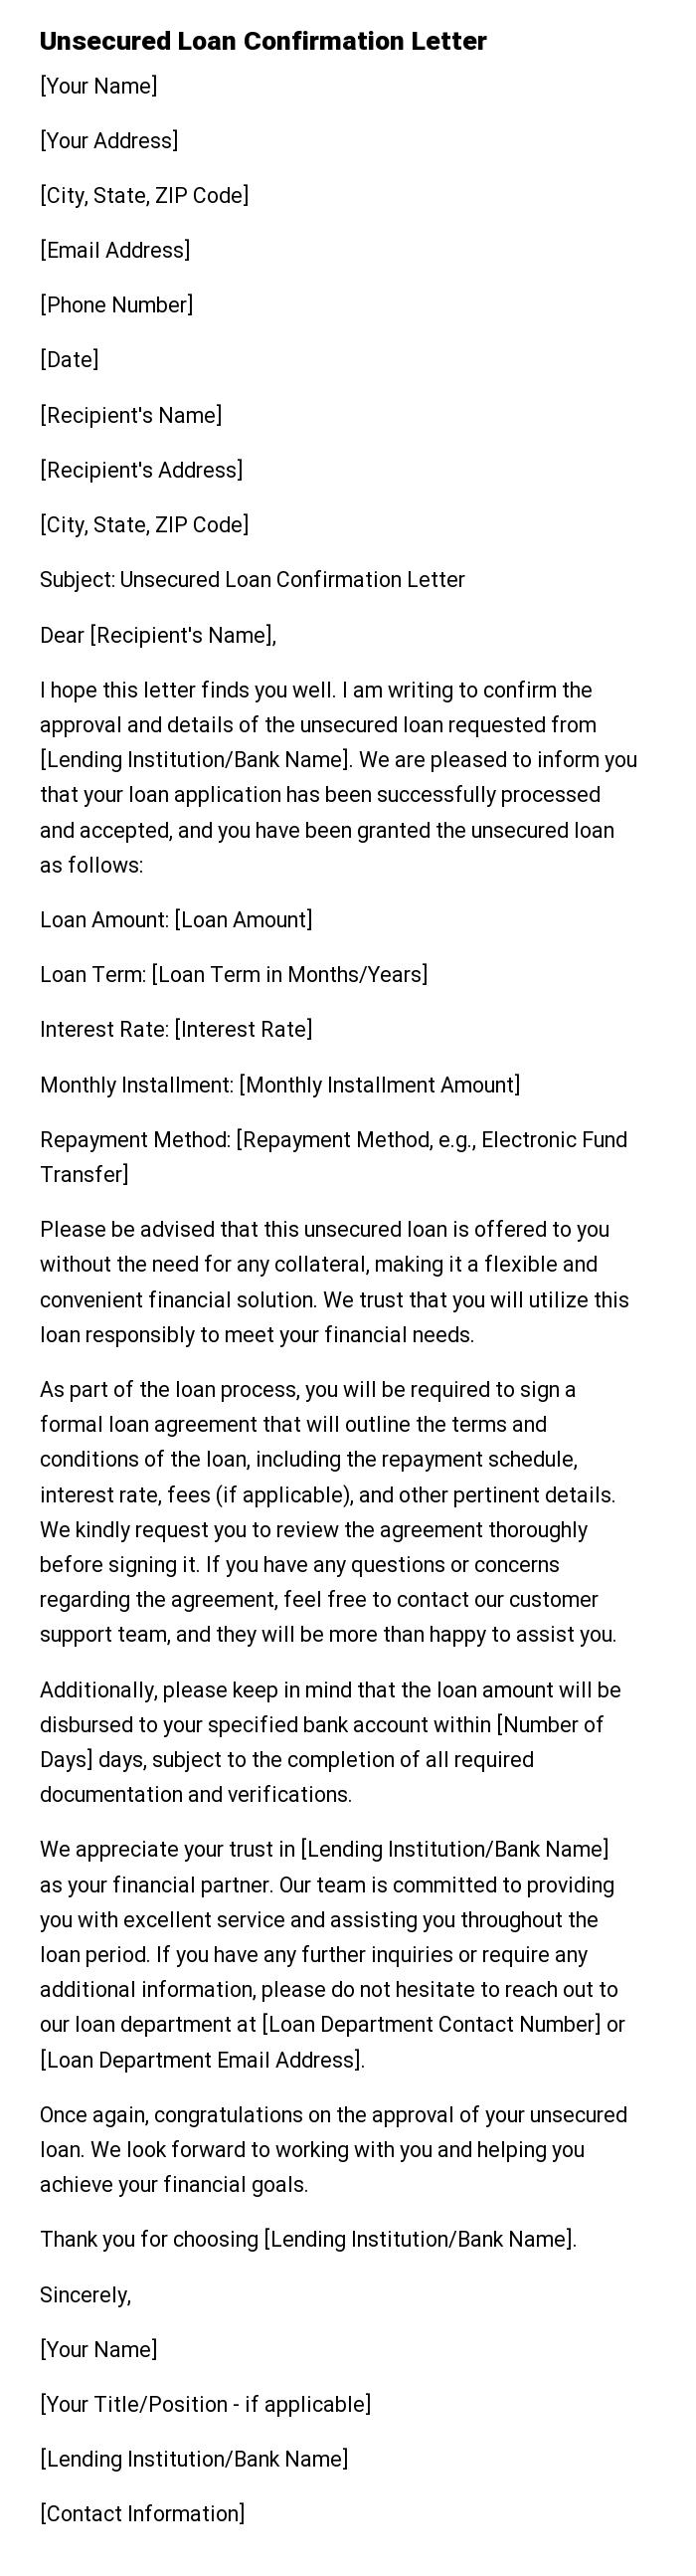 Unsecured Loan Confirmation Letter